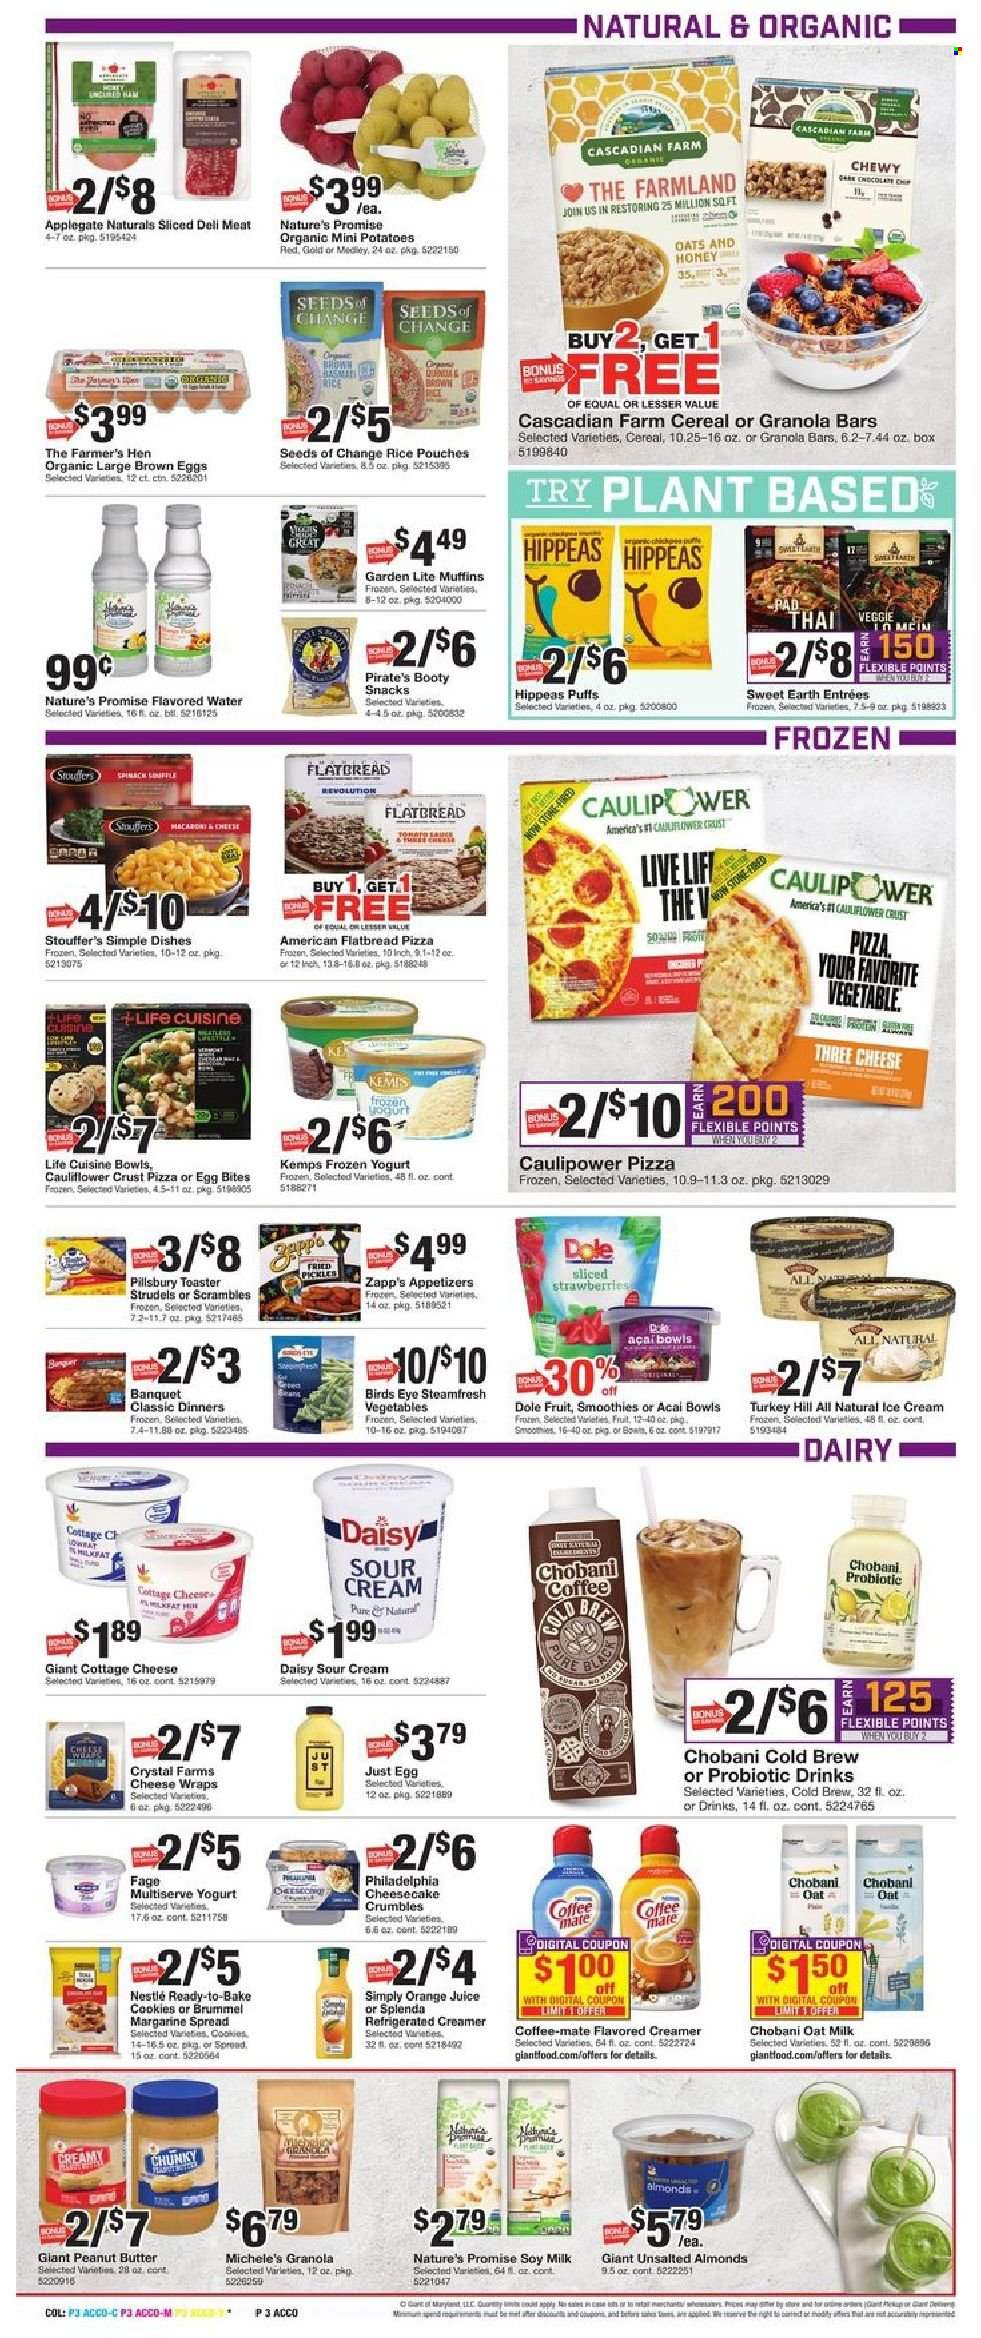 thumbnail - Giant Food Flyer - 01/02/2022 - 01/06/2022 - Sales products - Nature’s Promise, flatbread, wraps, puffs, muffin, potatoes, Dole, pizza, Pillsbury, Bird's Eye, cottage cheese, Philadelphia, Kemps, yoghurt, Chobani, Coffee-Mate, soy milk, oat milk, margarine, sour cream, creamer, ice cream, Stouffer's, cookies, Nestlé, snack, pickles, cereals, granola bar, basmati rice, brown rice, rice, peanut butter, almonds, orange juice, juice, smoothie, flavored water, beer. Page 3.